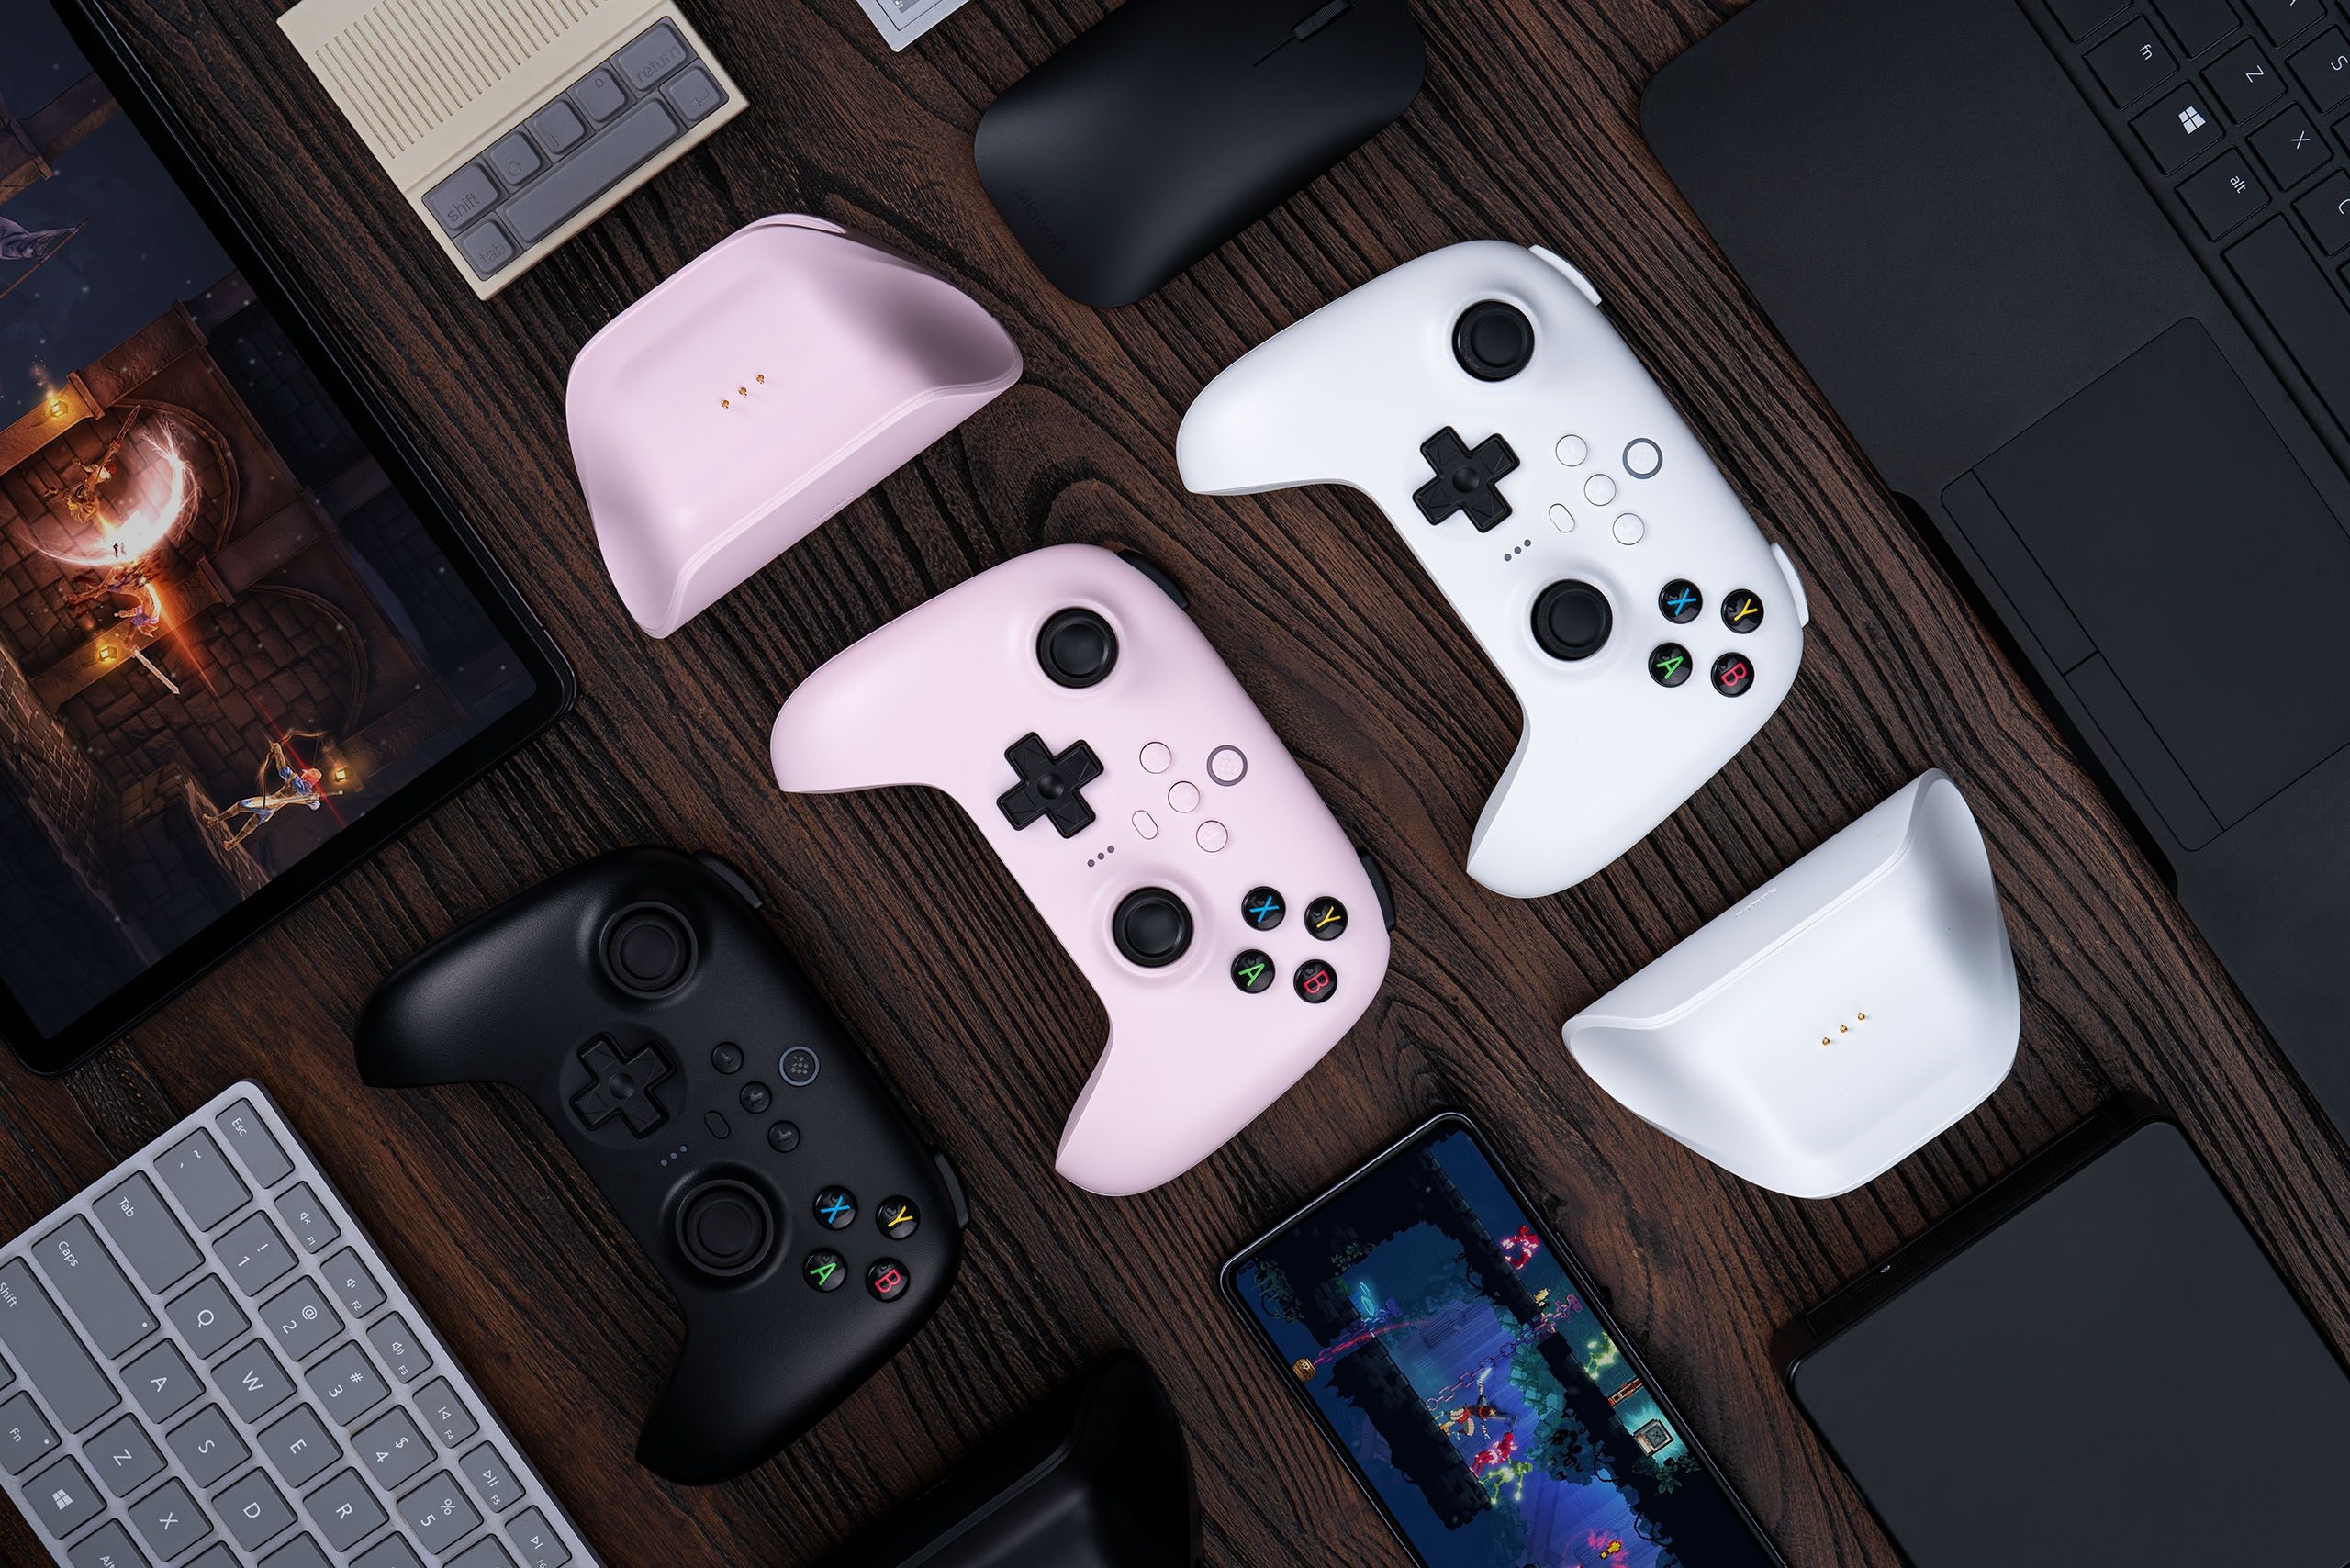 8BitDo reveals wireless versions of its Xbox-style Ultimate Controller | DeviceDaily.com